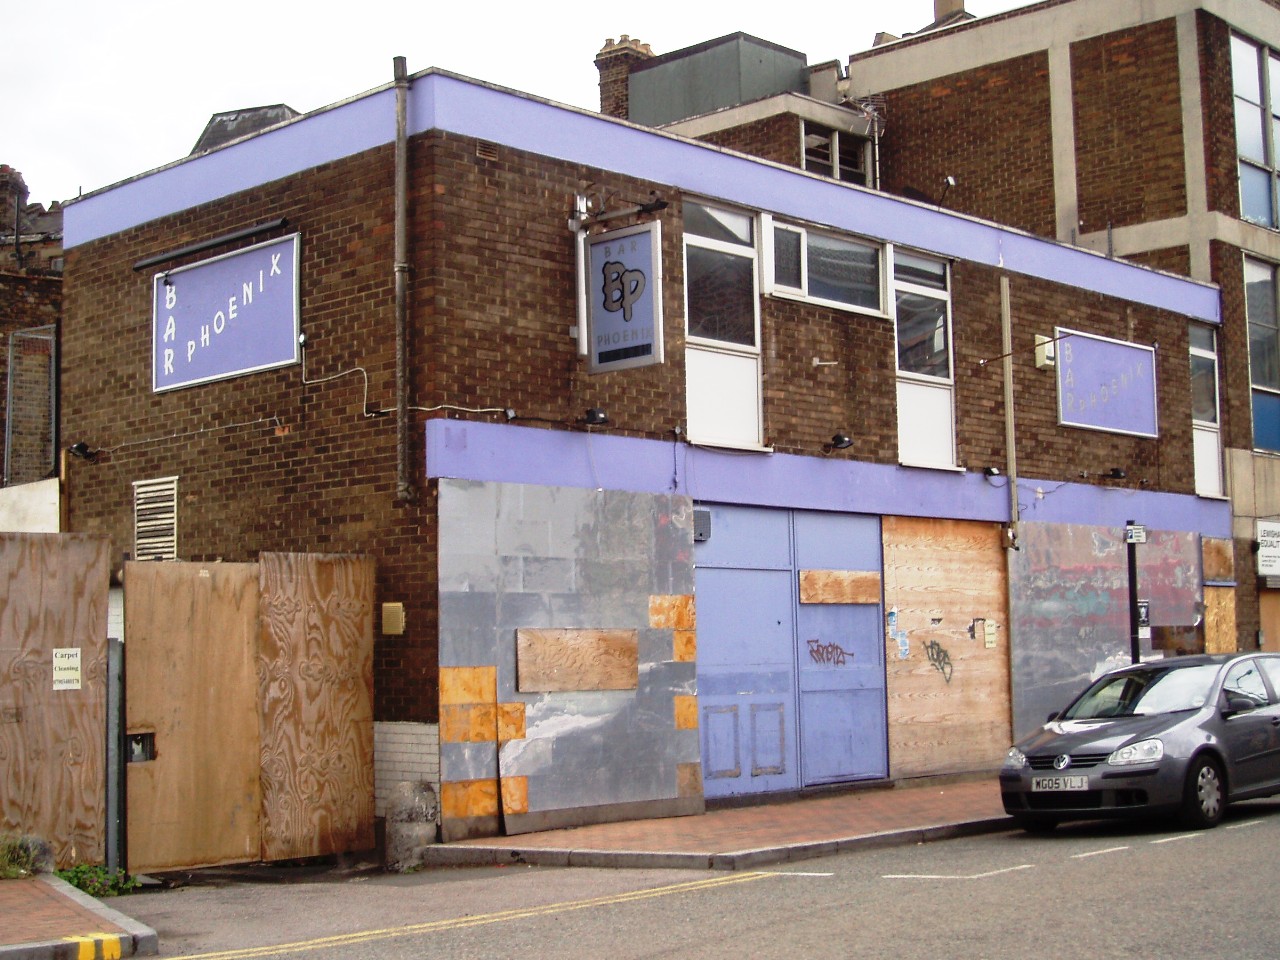 The damaged, neglected exterior of a pub